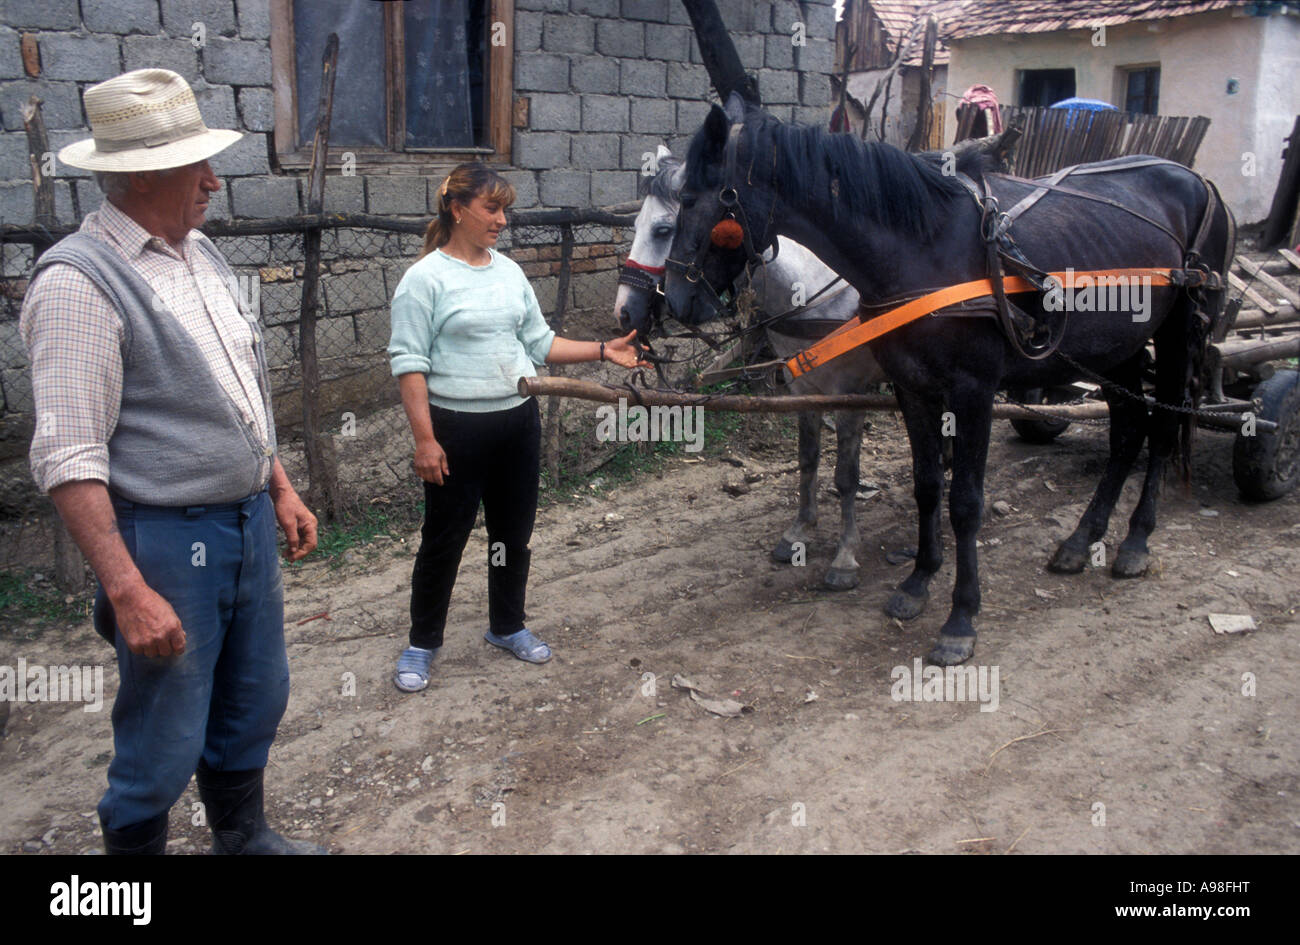 A Gypsy man and woman looking at two horses hitched to wagon in Transylvanian, Romanian village of Soard. Stock Photo